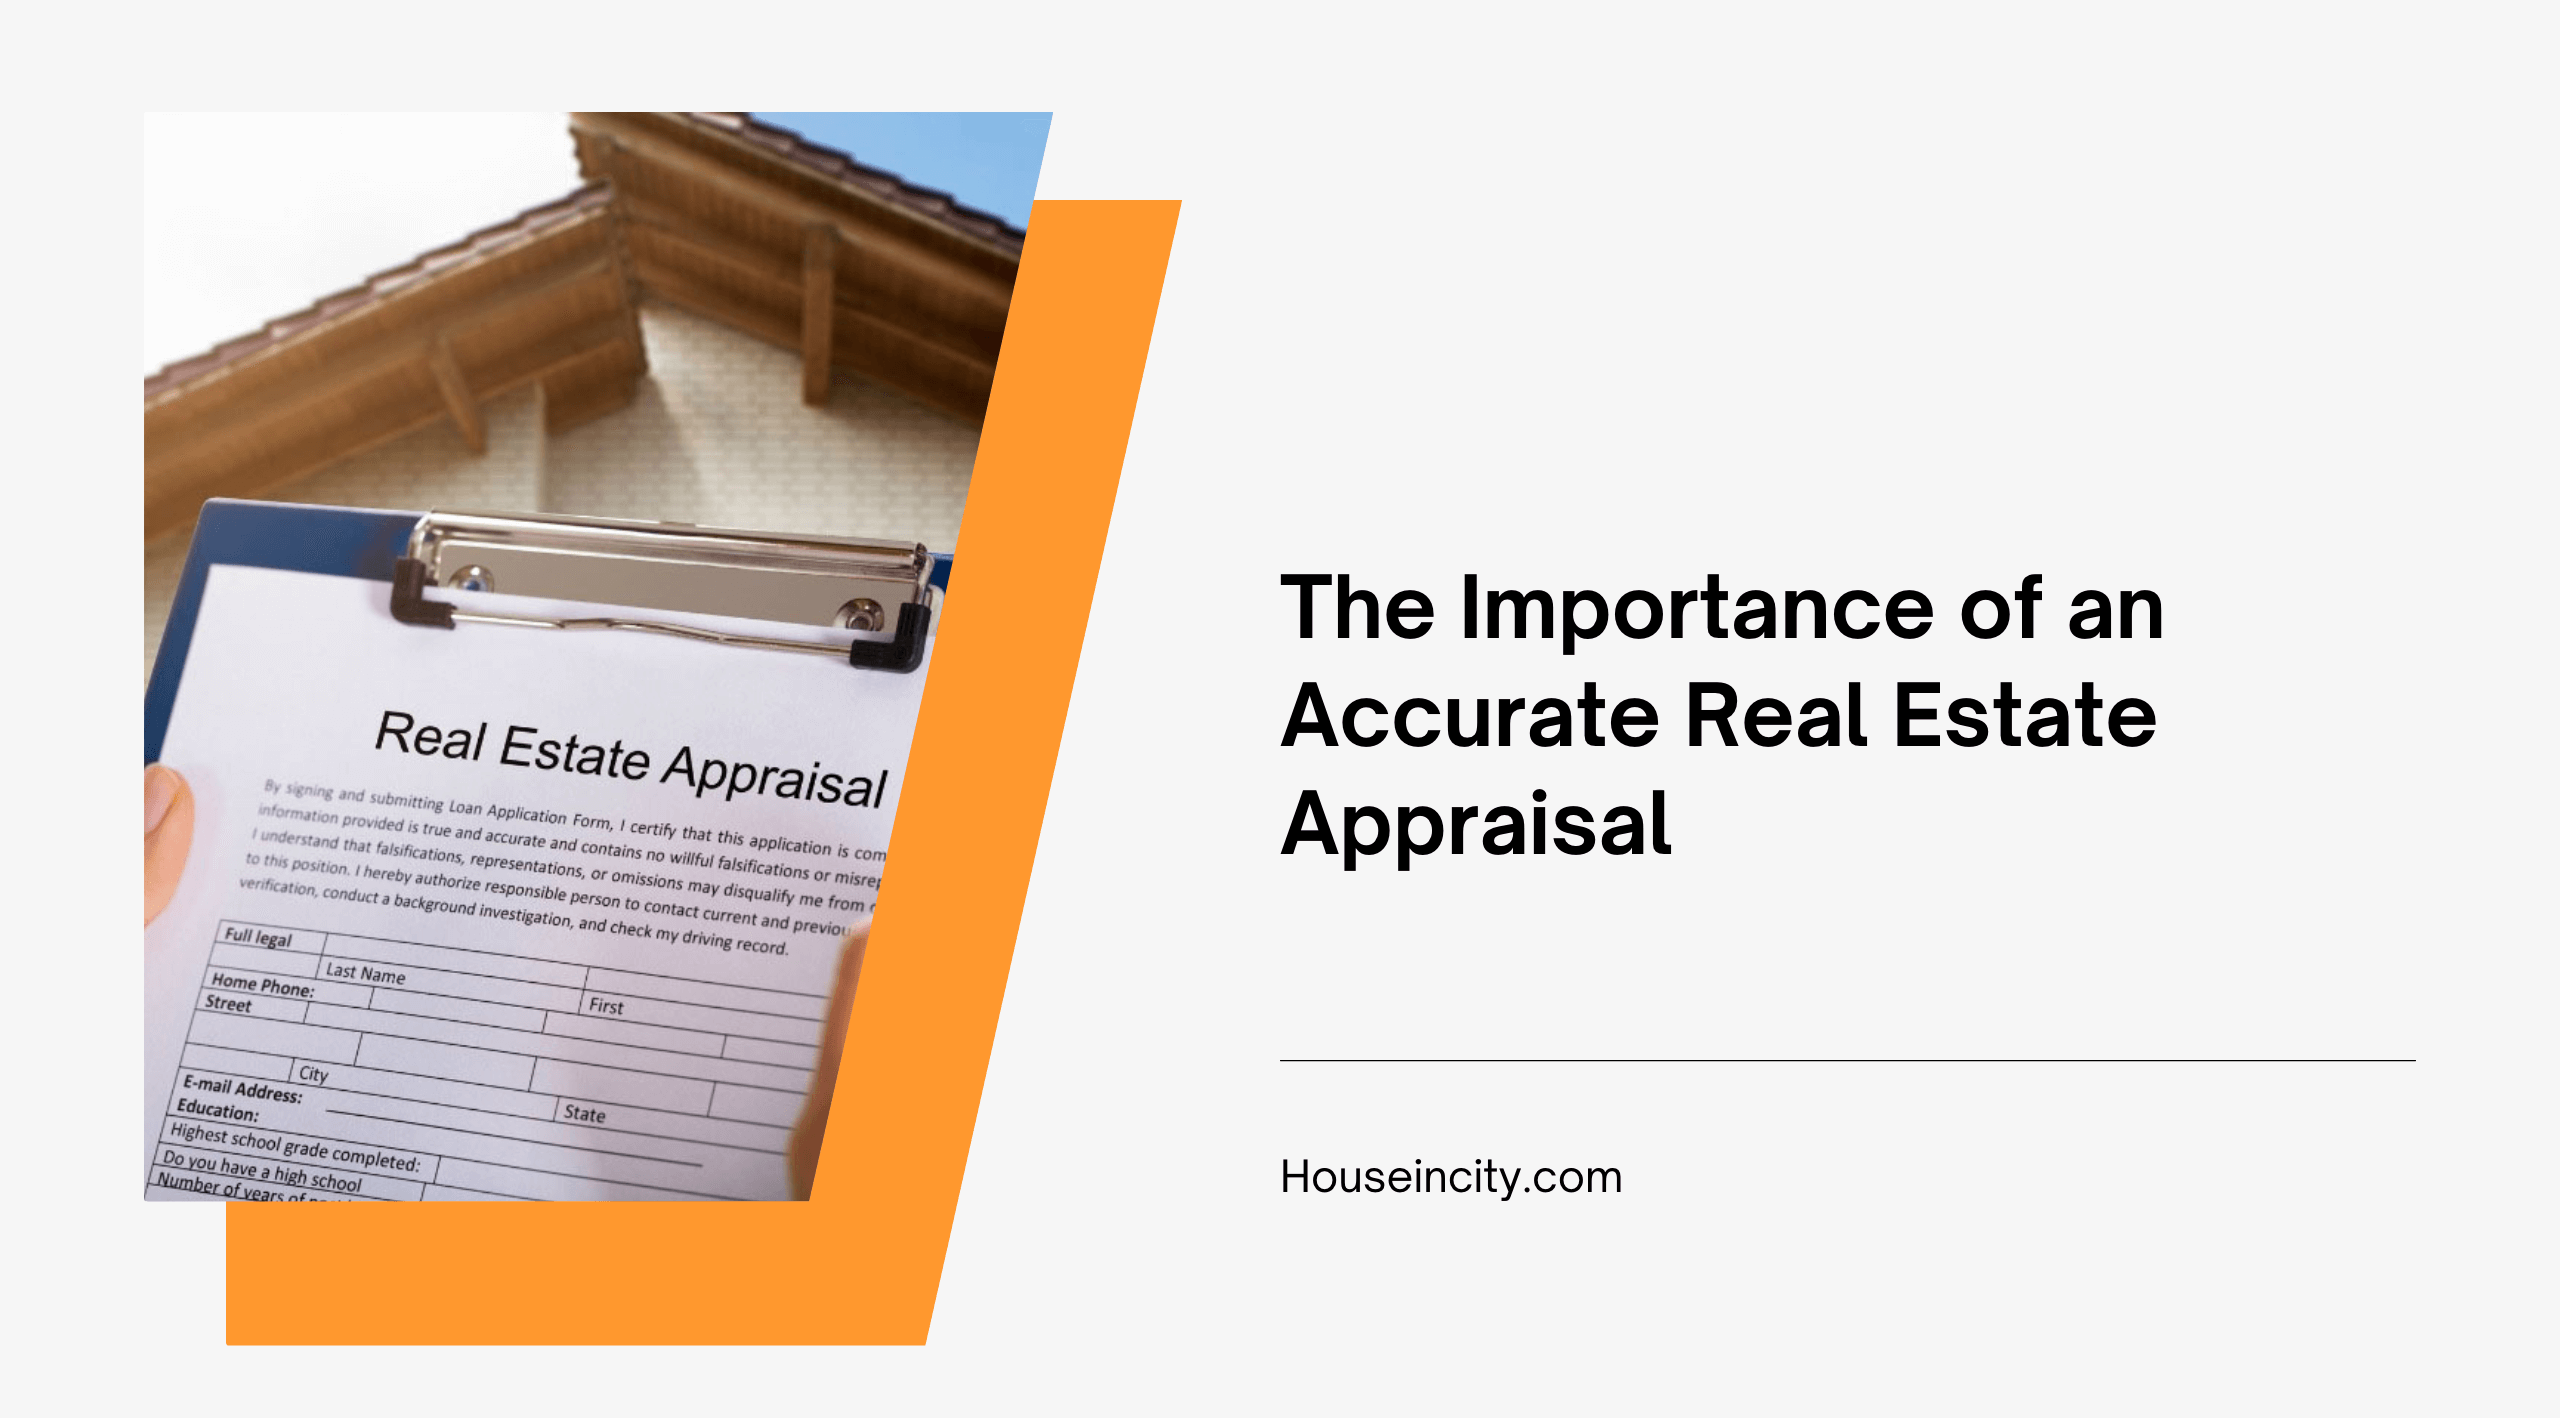 The Importance of an Accurate Real Estate Appraisal